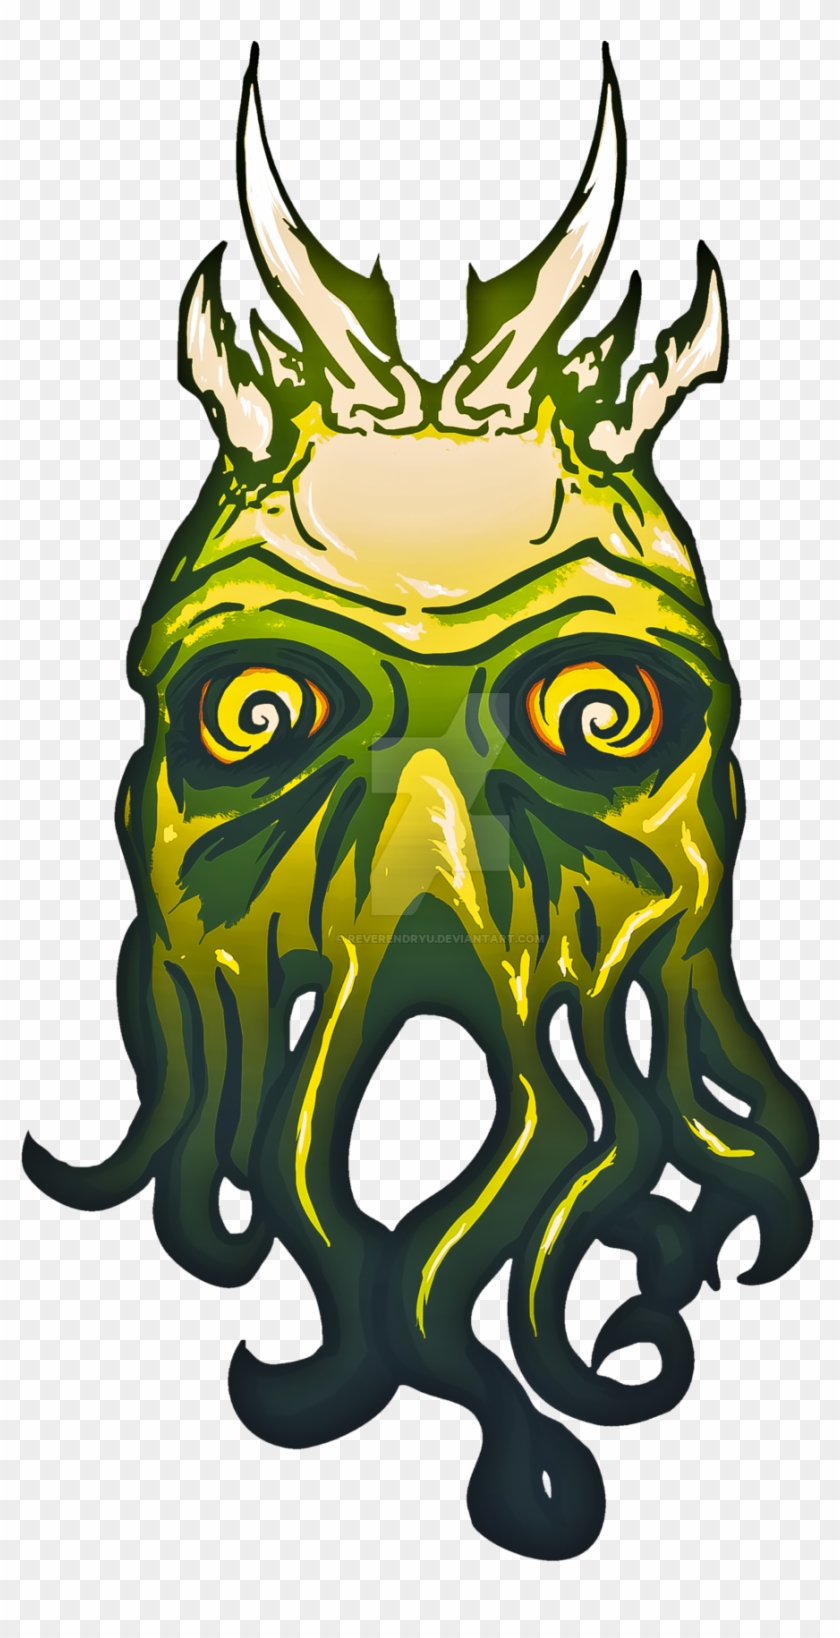 King Cthulhu Tee By Reverendryu King Cthulhu Tee By - Cthulhu Vector #504540